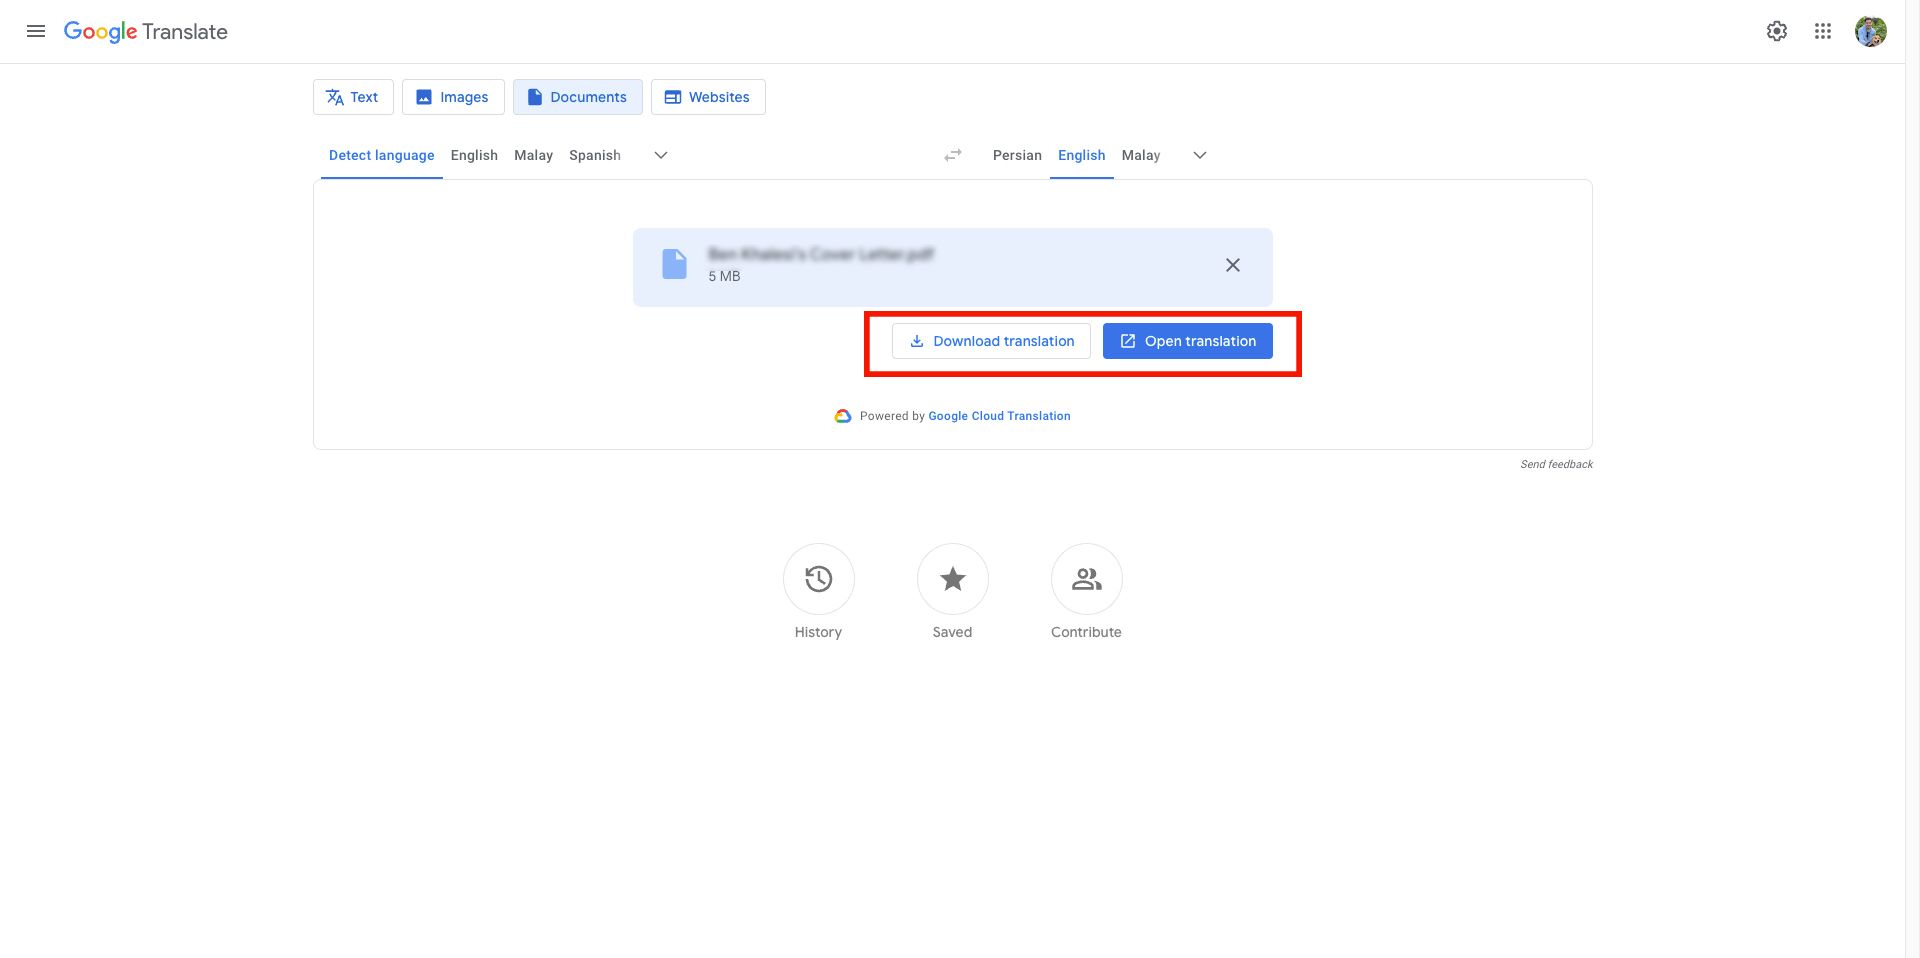 The image shows the Google Translate web interface on the 'Documents' tab that is 5 MB in size. There are two buttons highlighted in red: 'Download translation' and 'Open translation'.